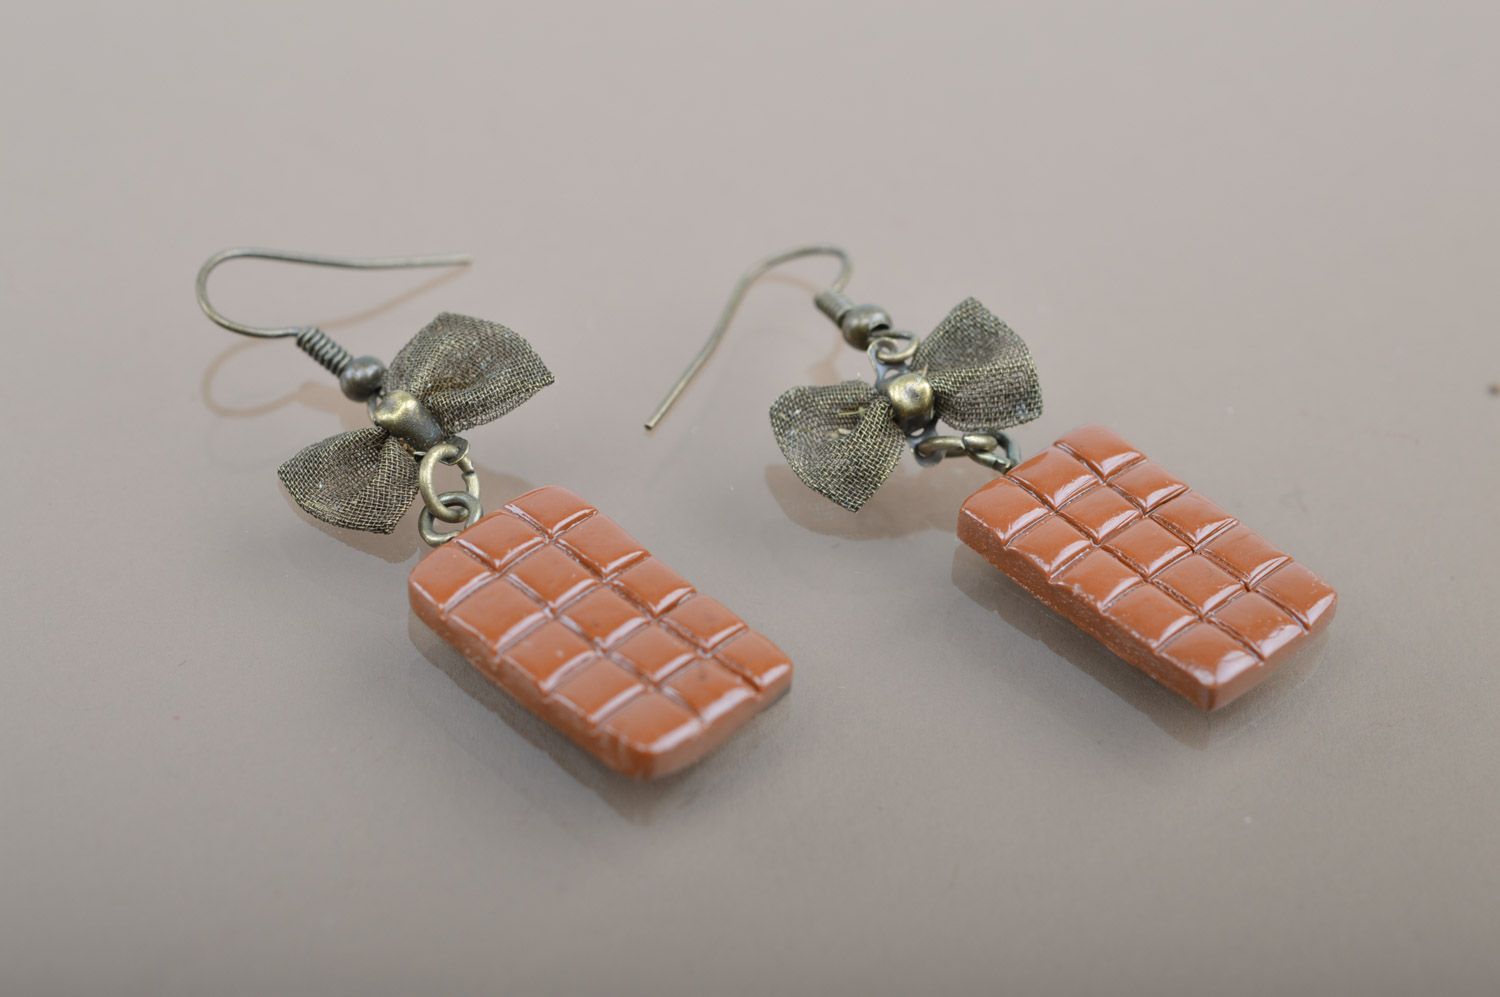 Homemade plastic earrings with charms in the shape of chocolate bars photo 4